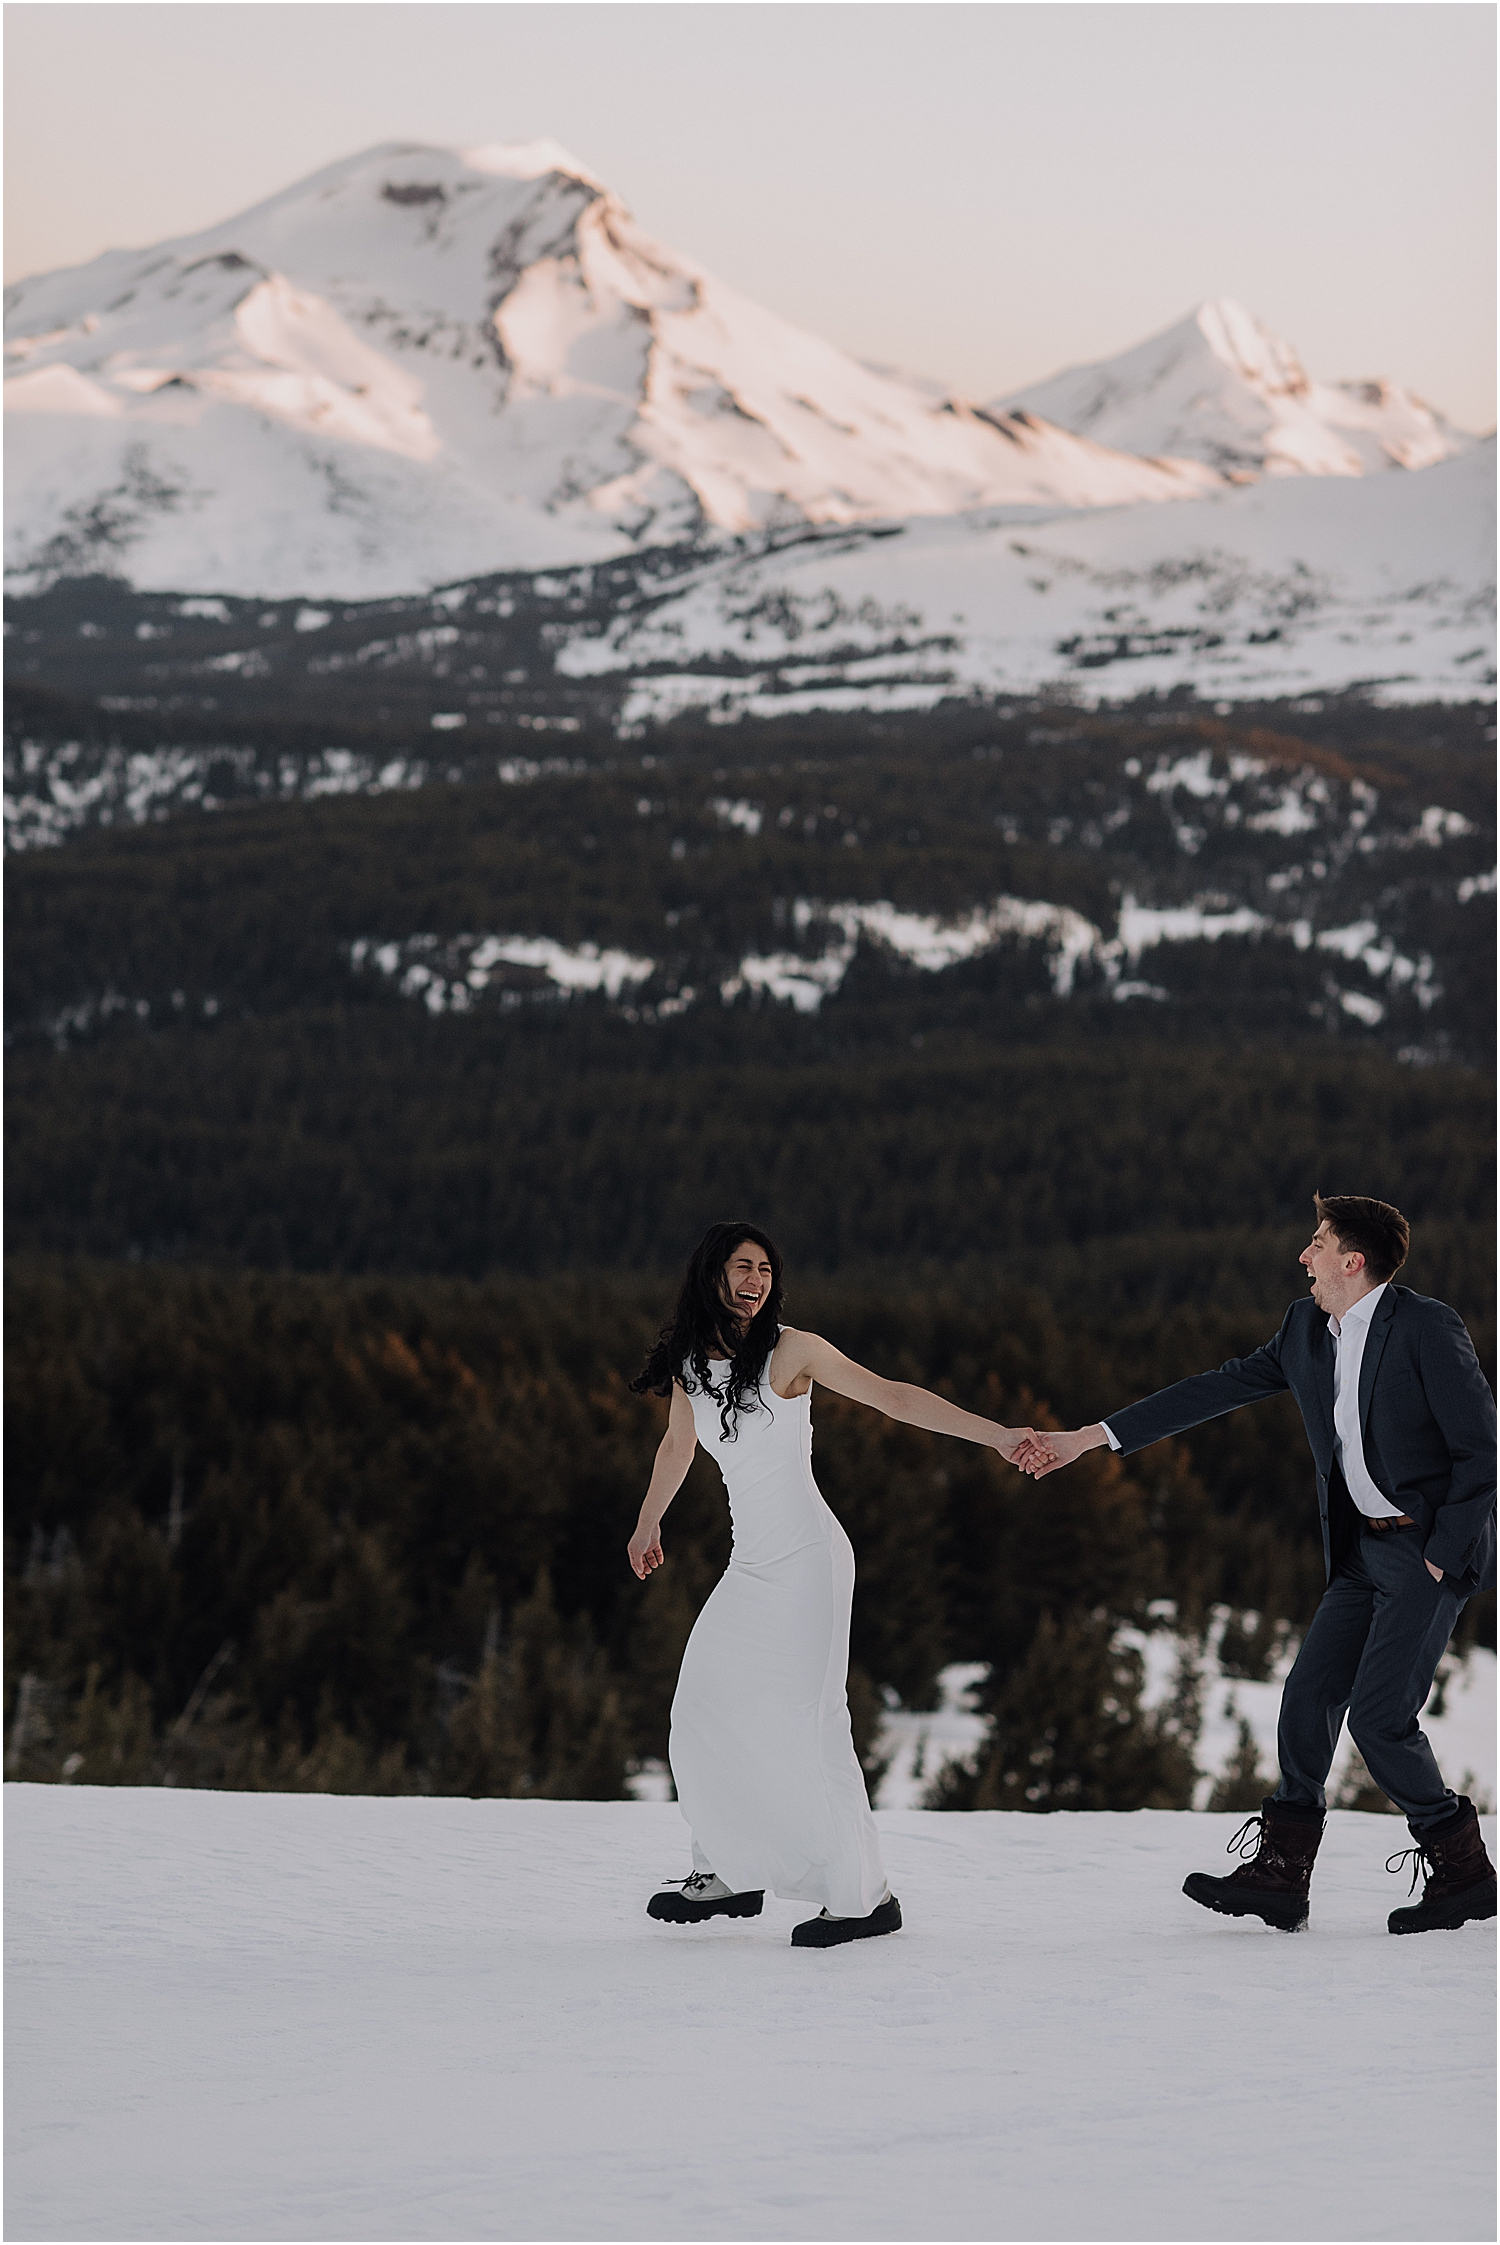 how to elope in alaska an epic adventure elopement planning guide